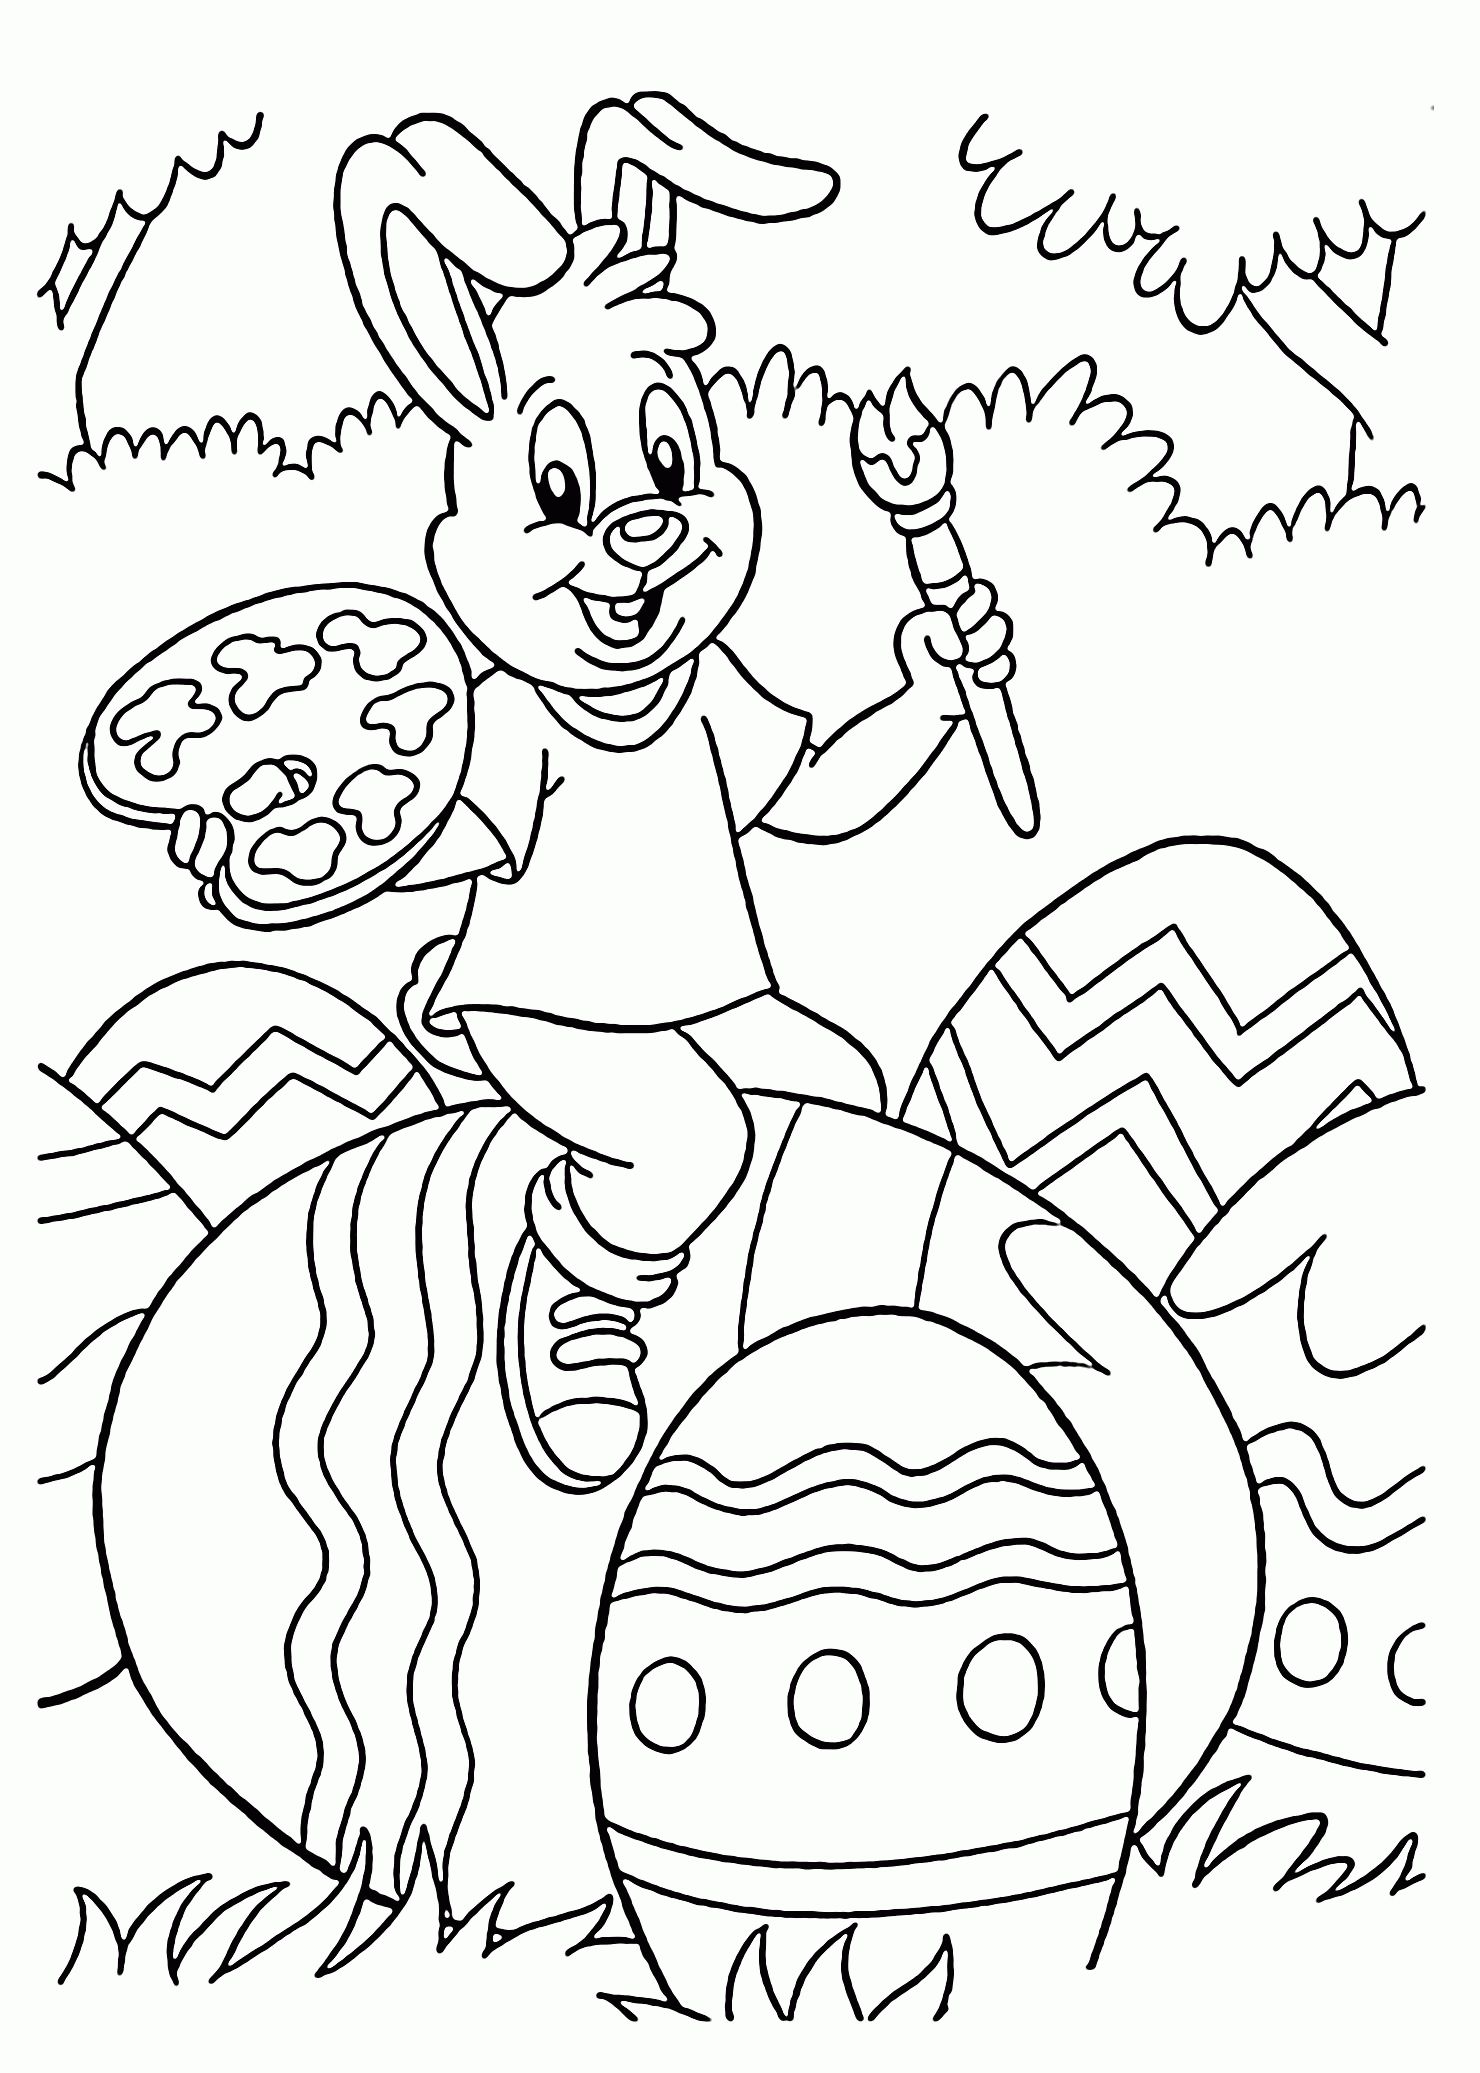 15 Printable Easter Coloring Pages Holiday Vault